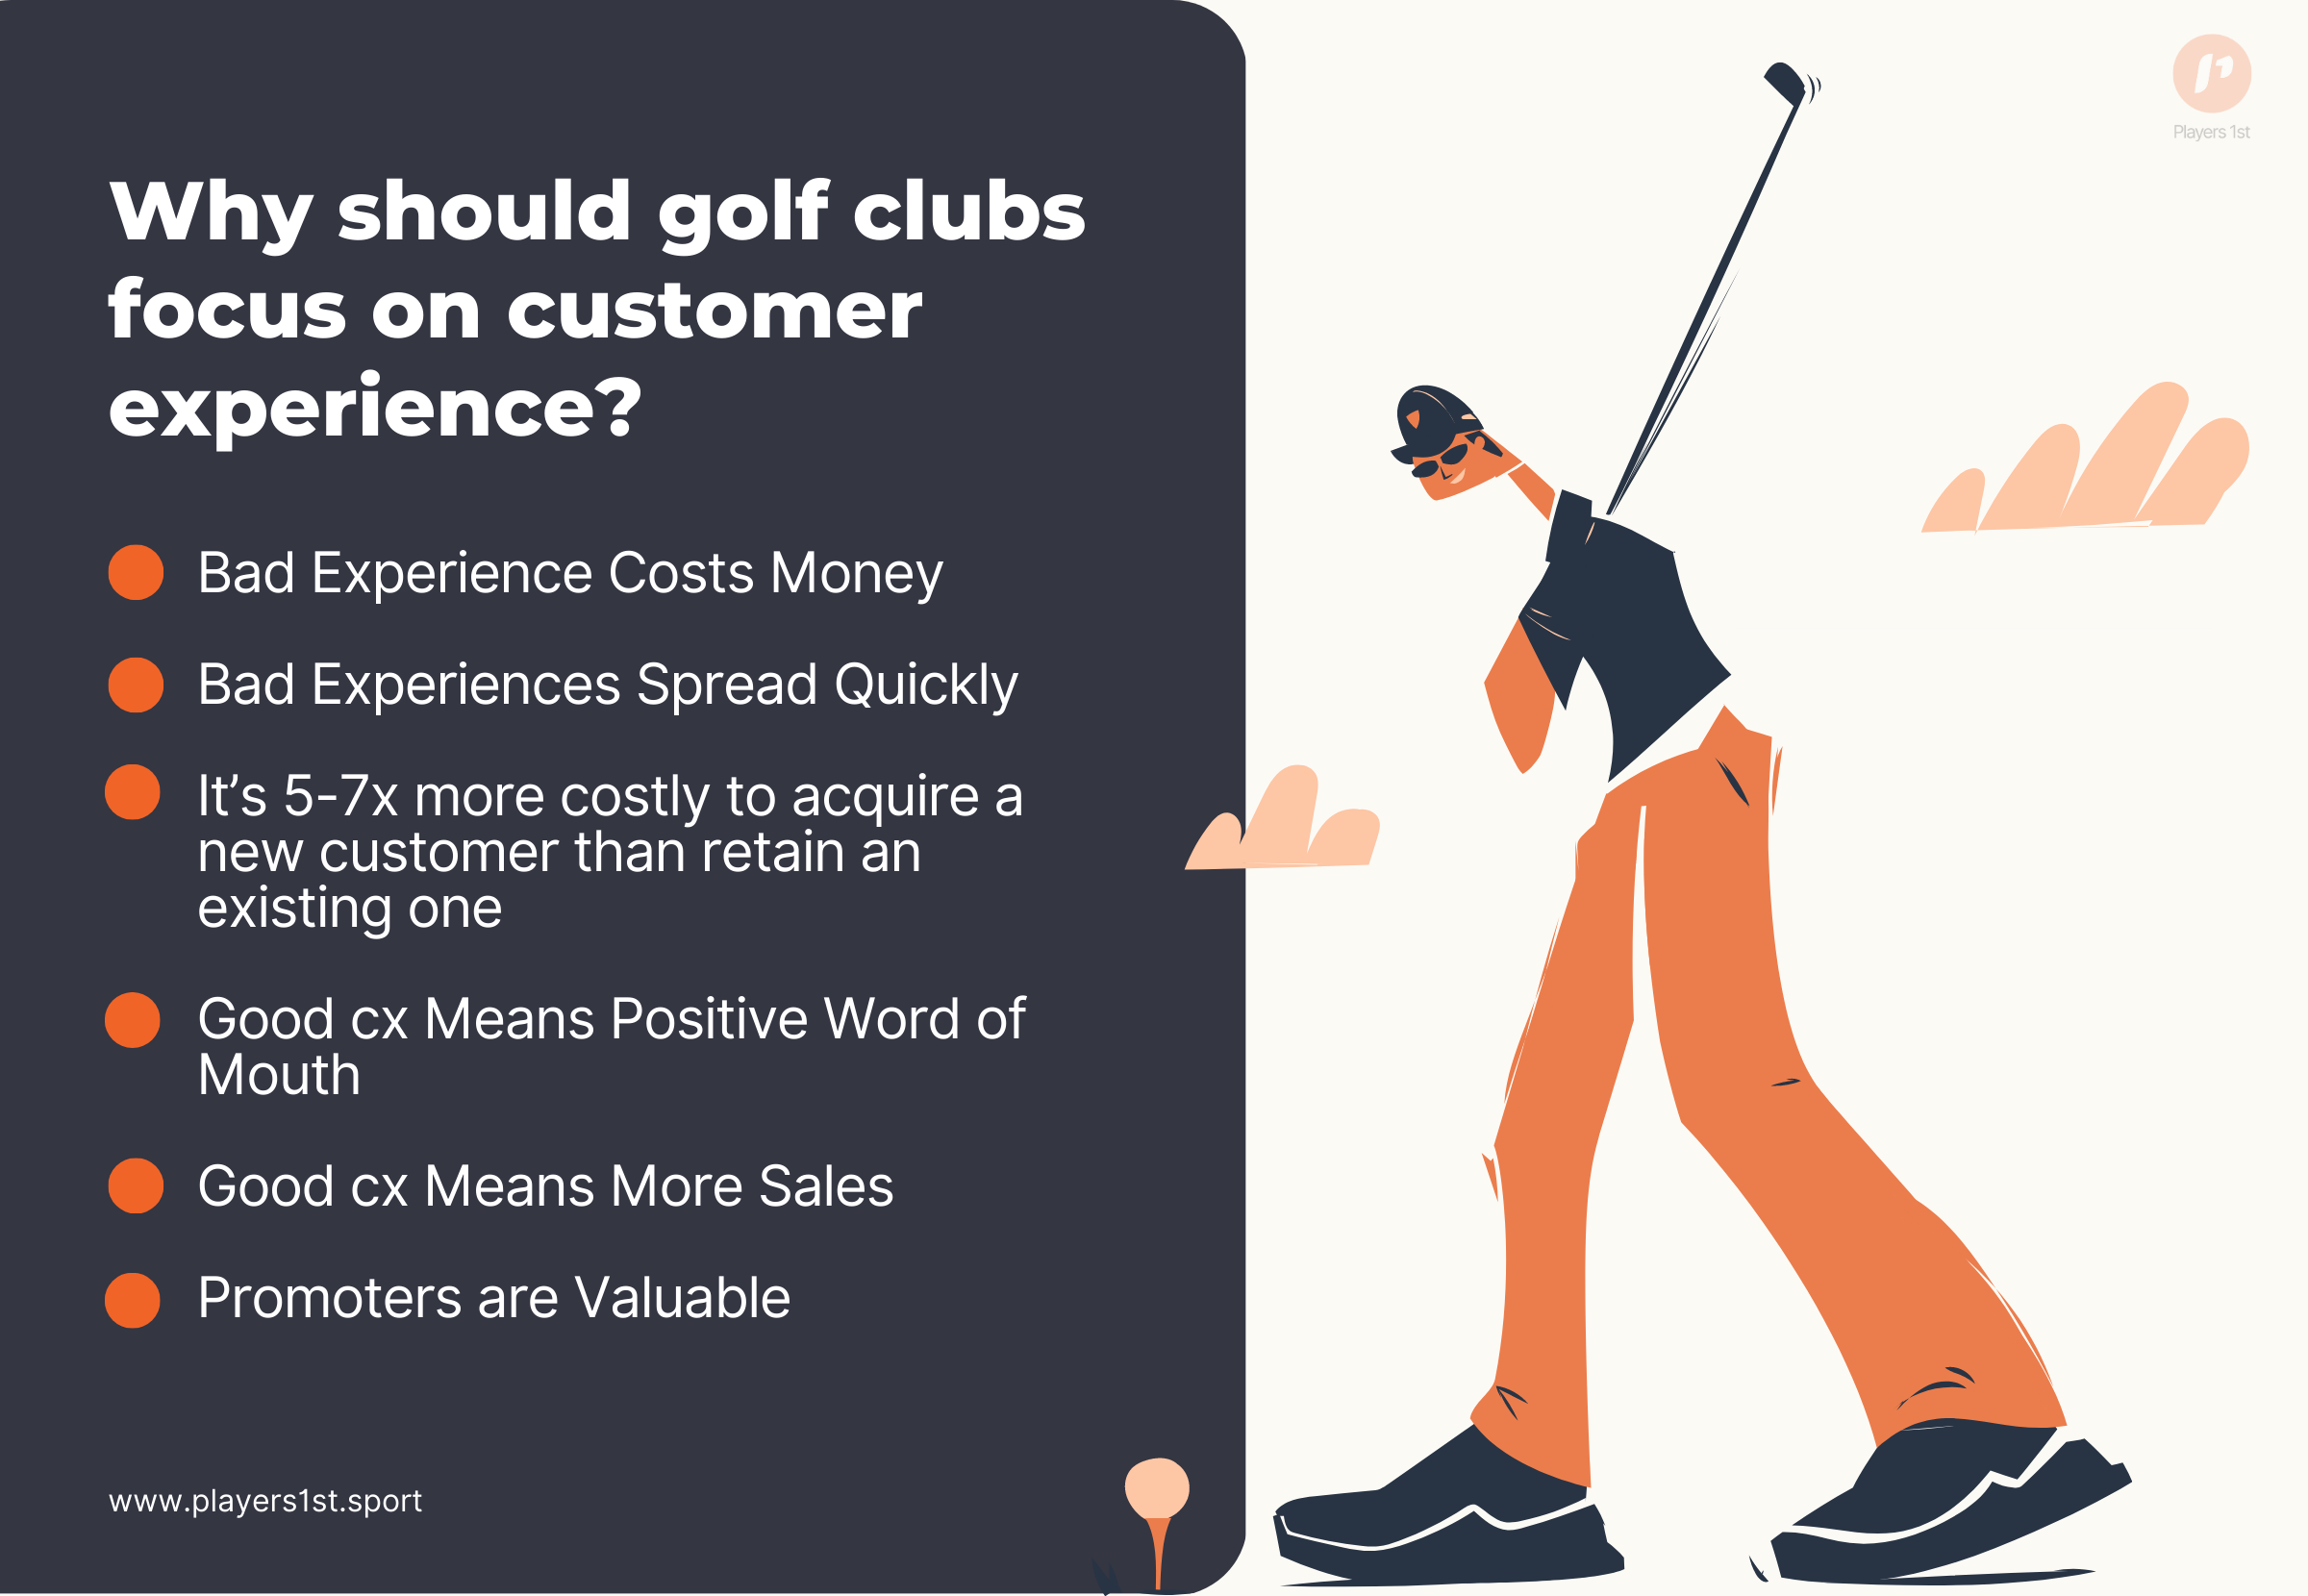 Why golf clubs should focus on customer experience.